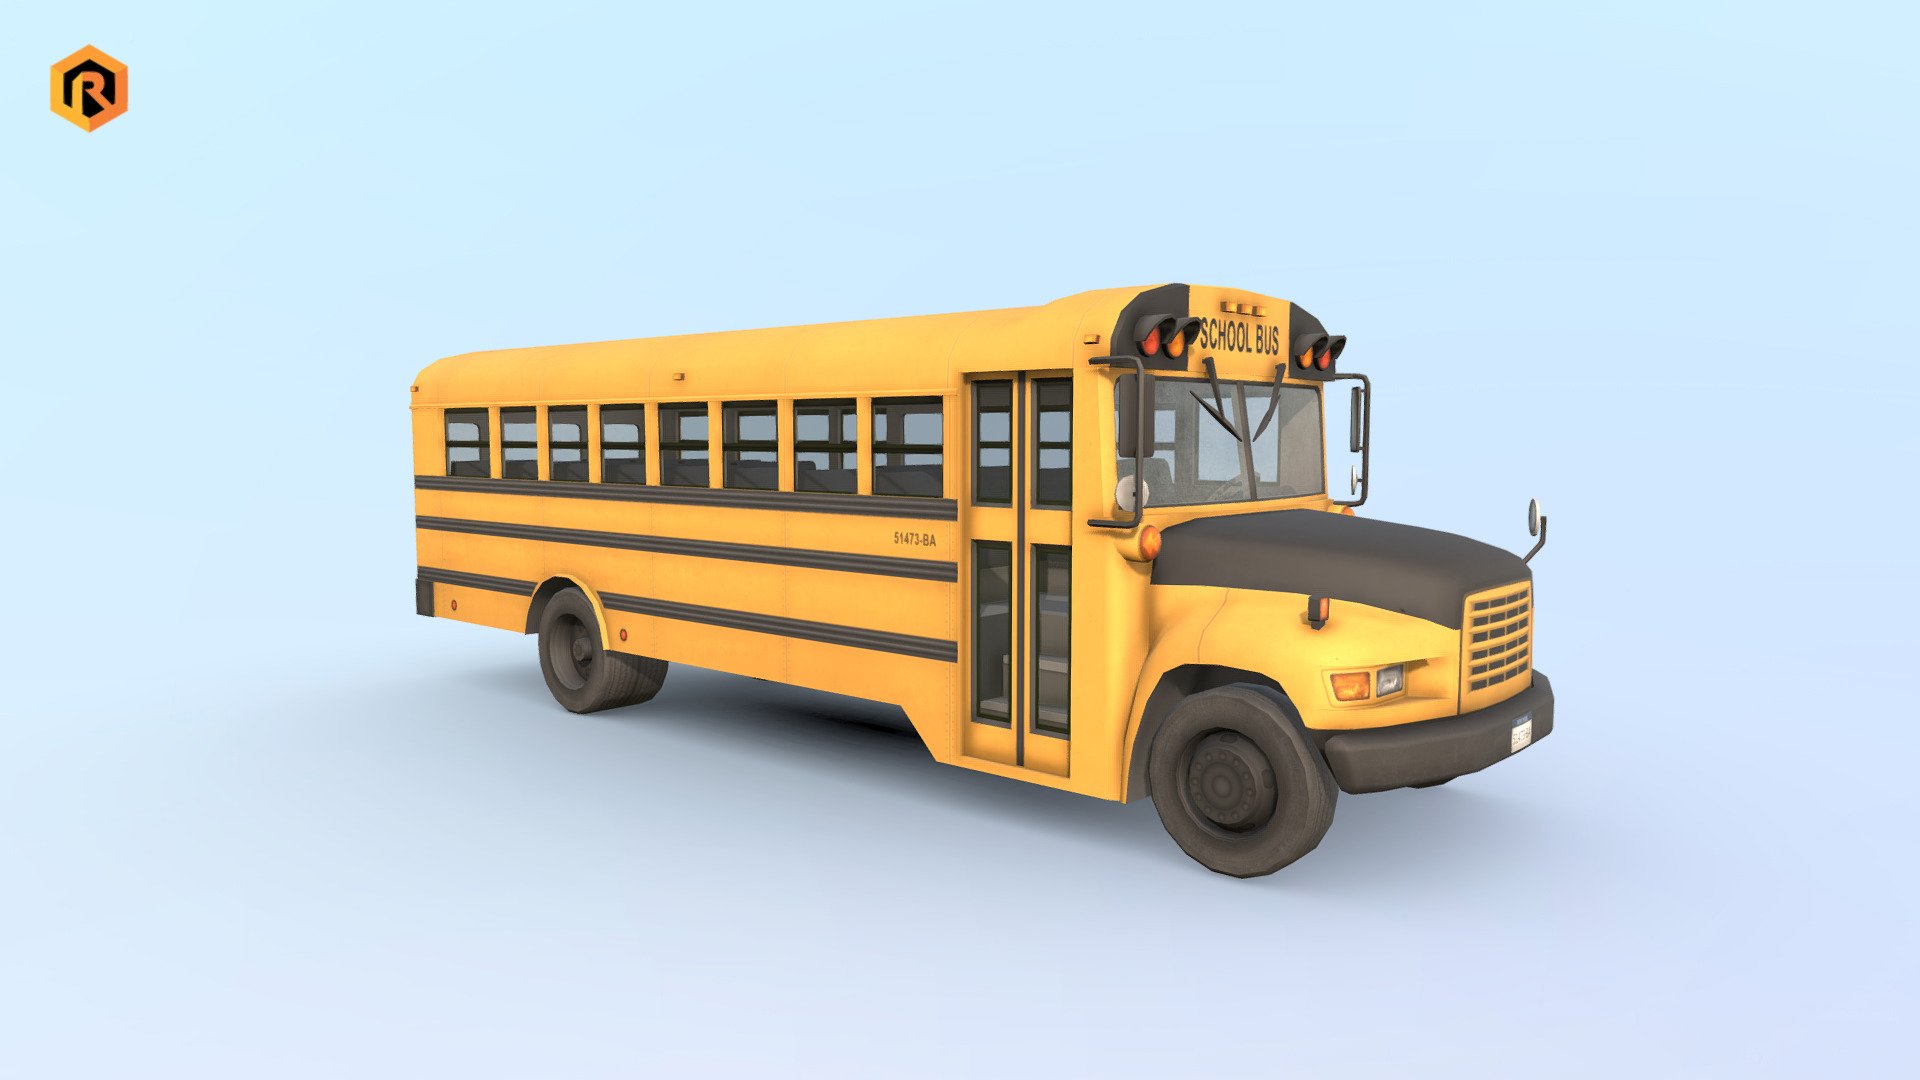 High quality low-poly model of U.S. School Bus. Interior part is also modeled. It is best for use in games and other real time applications. Model is built with great attention to details and realistic proportions with correct geometry. Textures are very detailed so it makes this model good enough for close-ups.

Model Info:




4096 x 4096 Diffuse and AO textures

6244 Triangles

3814 Polygons

3773 Vertices

Model is correctly divided into main part and wheels.

Model completely unwrapped.

Model is fully textured with all materials applied. 

Pivot points are correctly placed to suit animation process.

Model scaled to approximate real world size (centimeters).

All nodes, materials and textures are appropriately named.

Available file formats:




3ds Max 2016 (.max)

3D Studio (.3ds)

Collada (.dae)

Autodesk FBX (.fbx)

OBJ (.obj)

Unity3d 2017.3 (.unitypackage)
 - School Bus - Buy Royalty Free 3D model by Rescue3D Assets (@rescue3d) 3d model